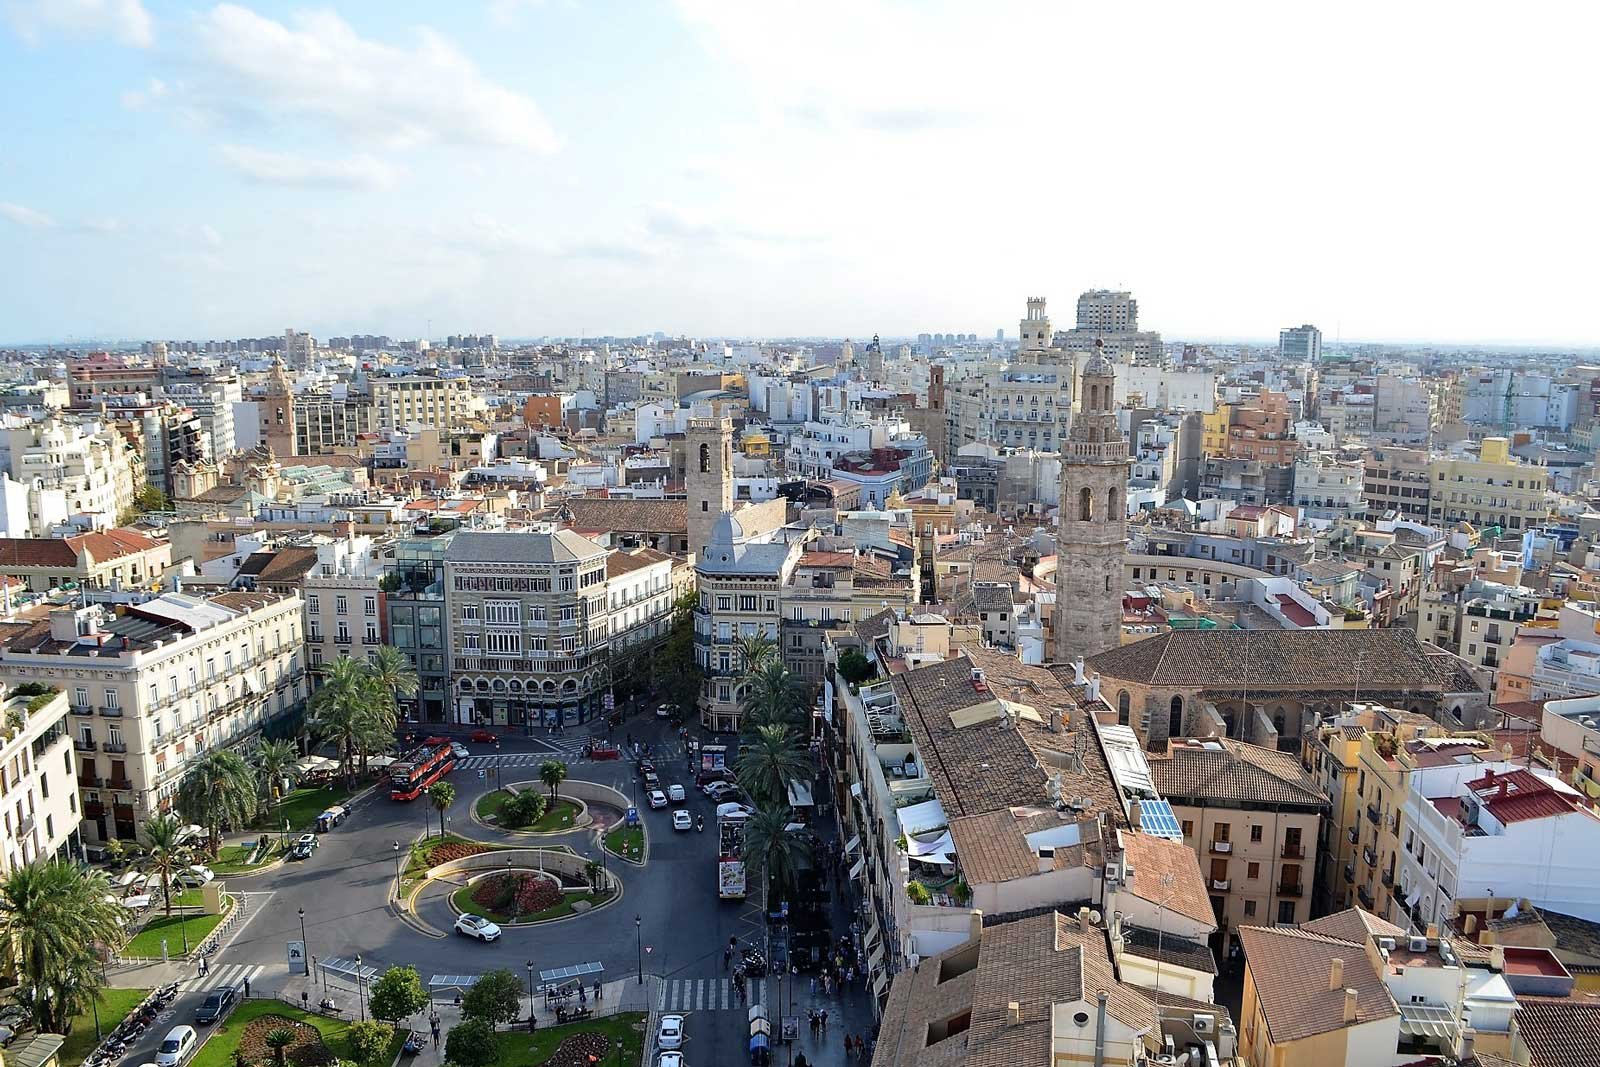 How to watch the city from the Miguelete Tower in Valencia